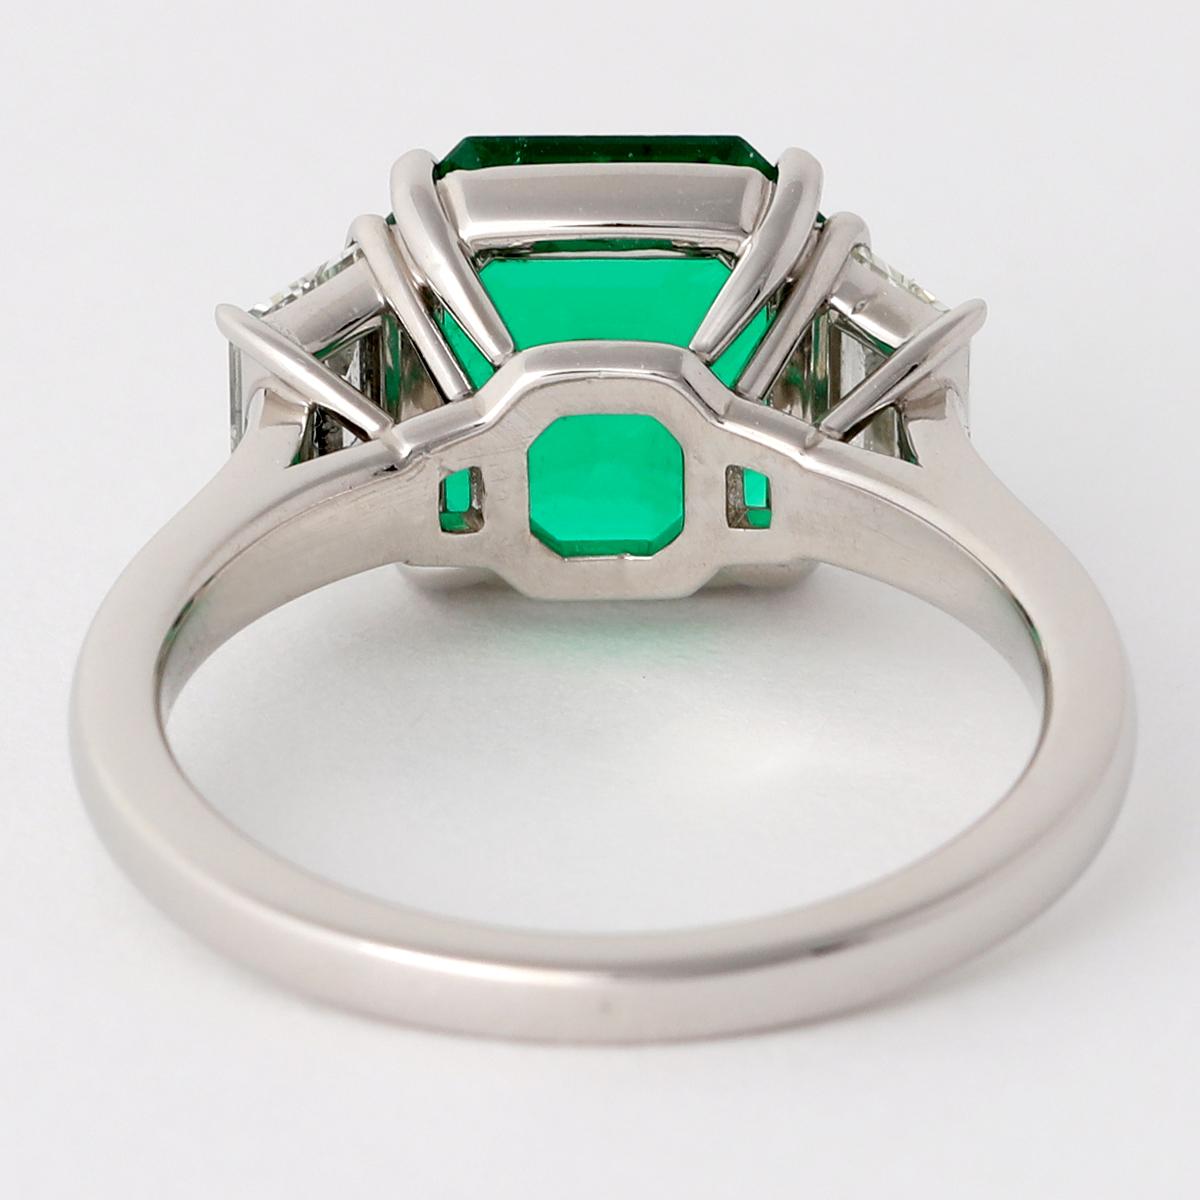 Vintage AGL SSEF 2.51 Carats Colombian Emerald Diamond Platinum Ring For Sale 1